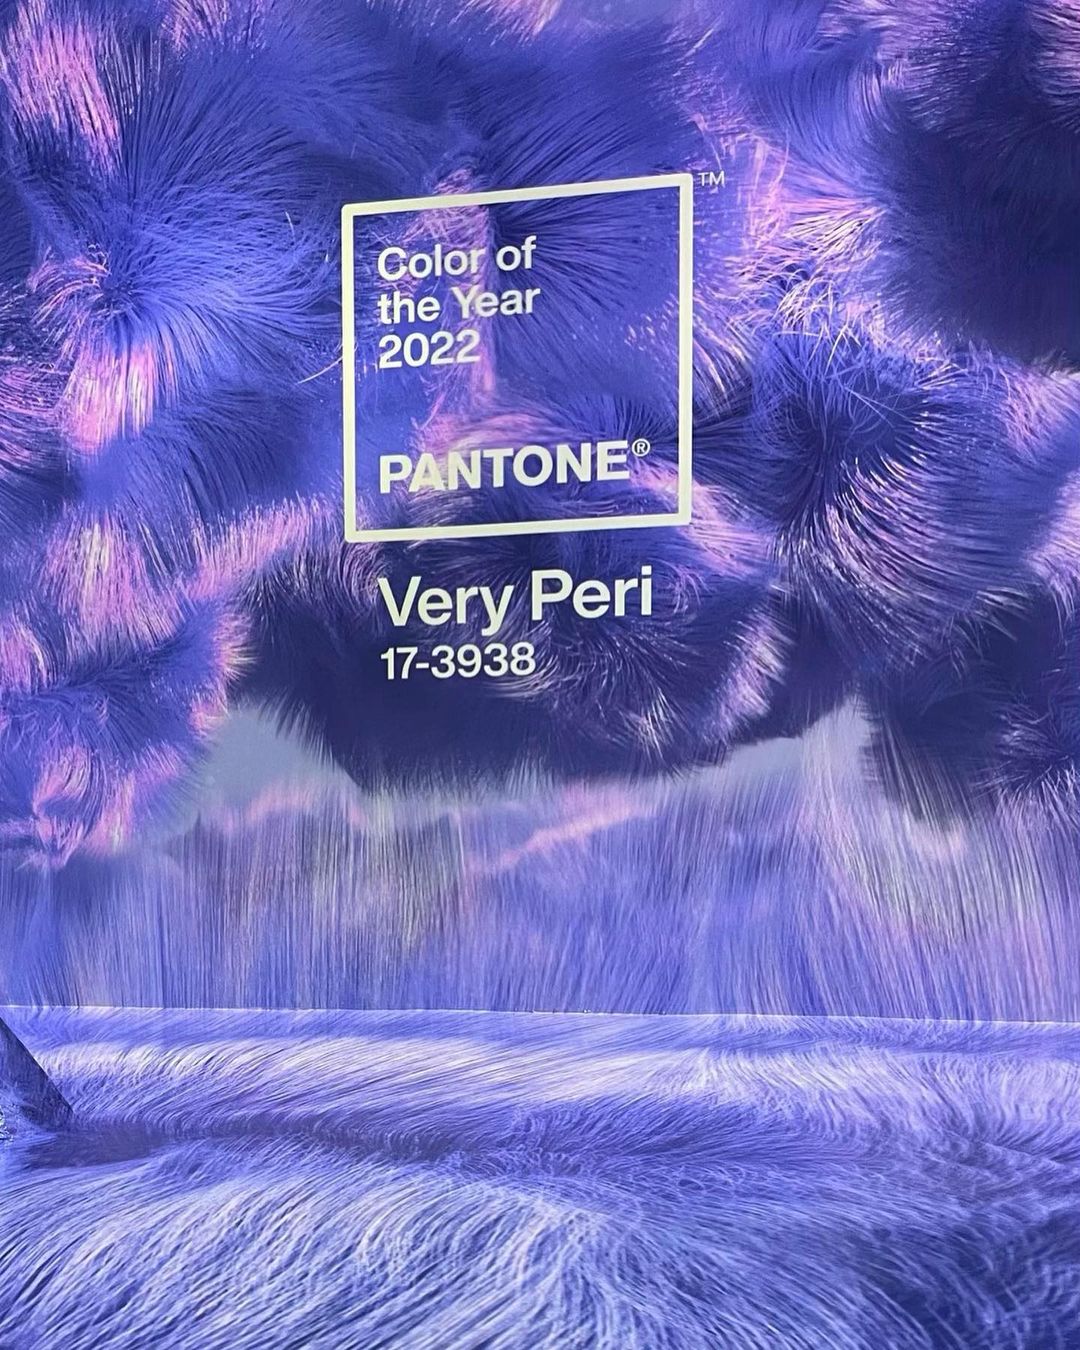 Pantone Color of the Year 2022 Very Peri Bangstyle House of Hair